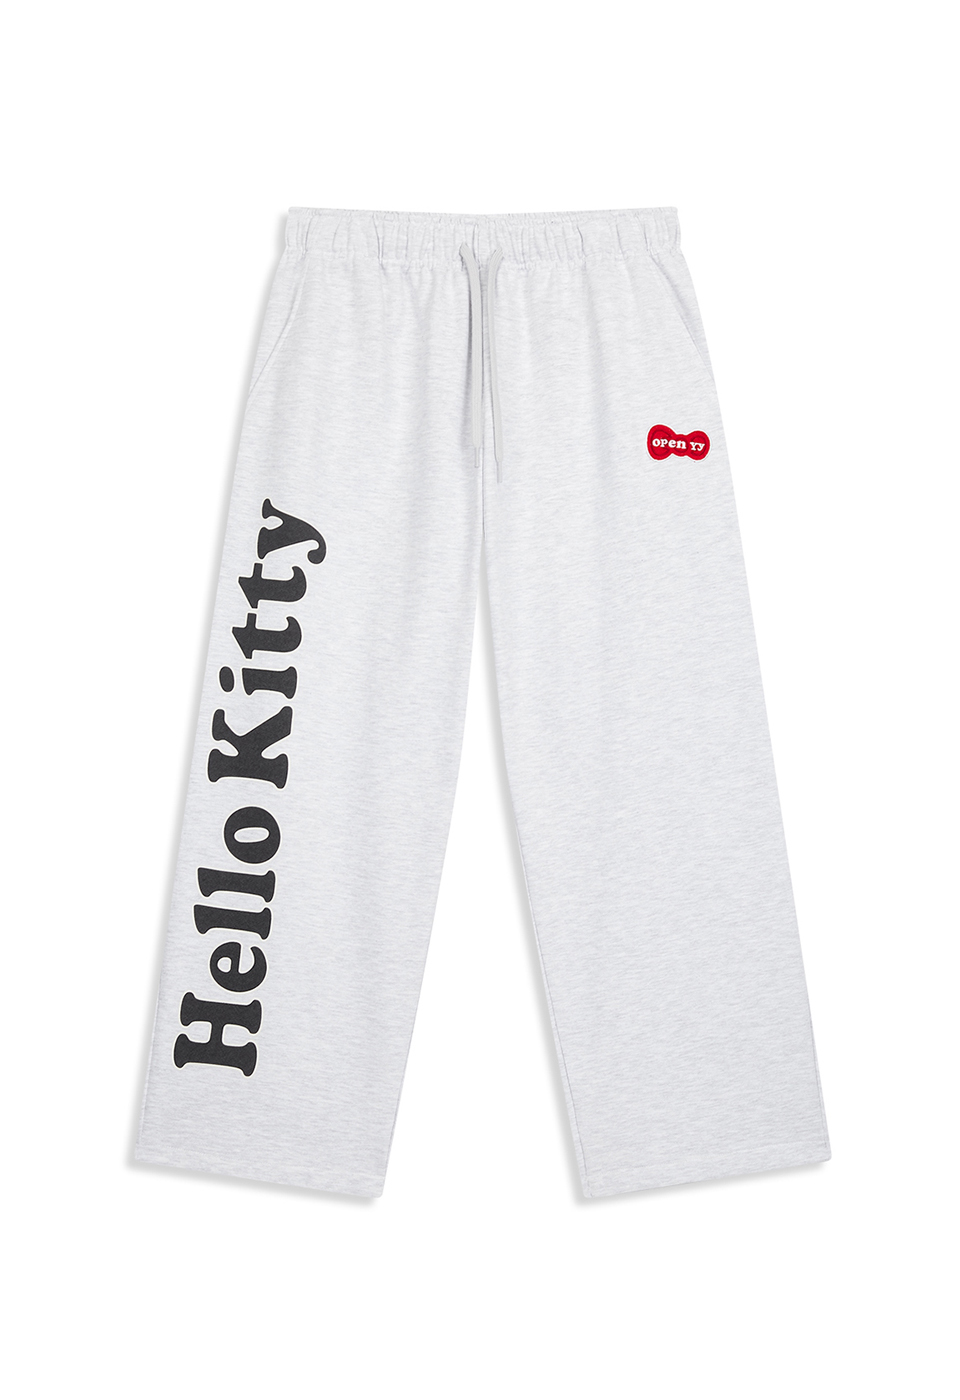 [6/11 DELIVERY] HELLO KITTY X YY ROUNDING TRACK PANTS, GRAY